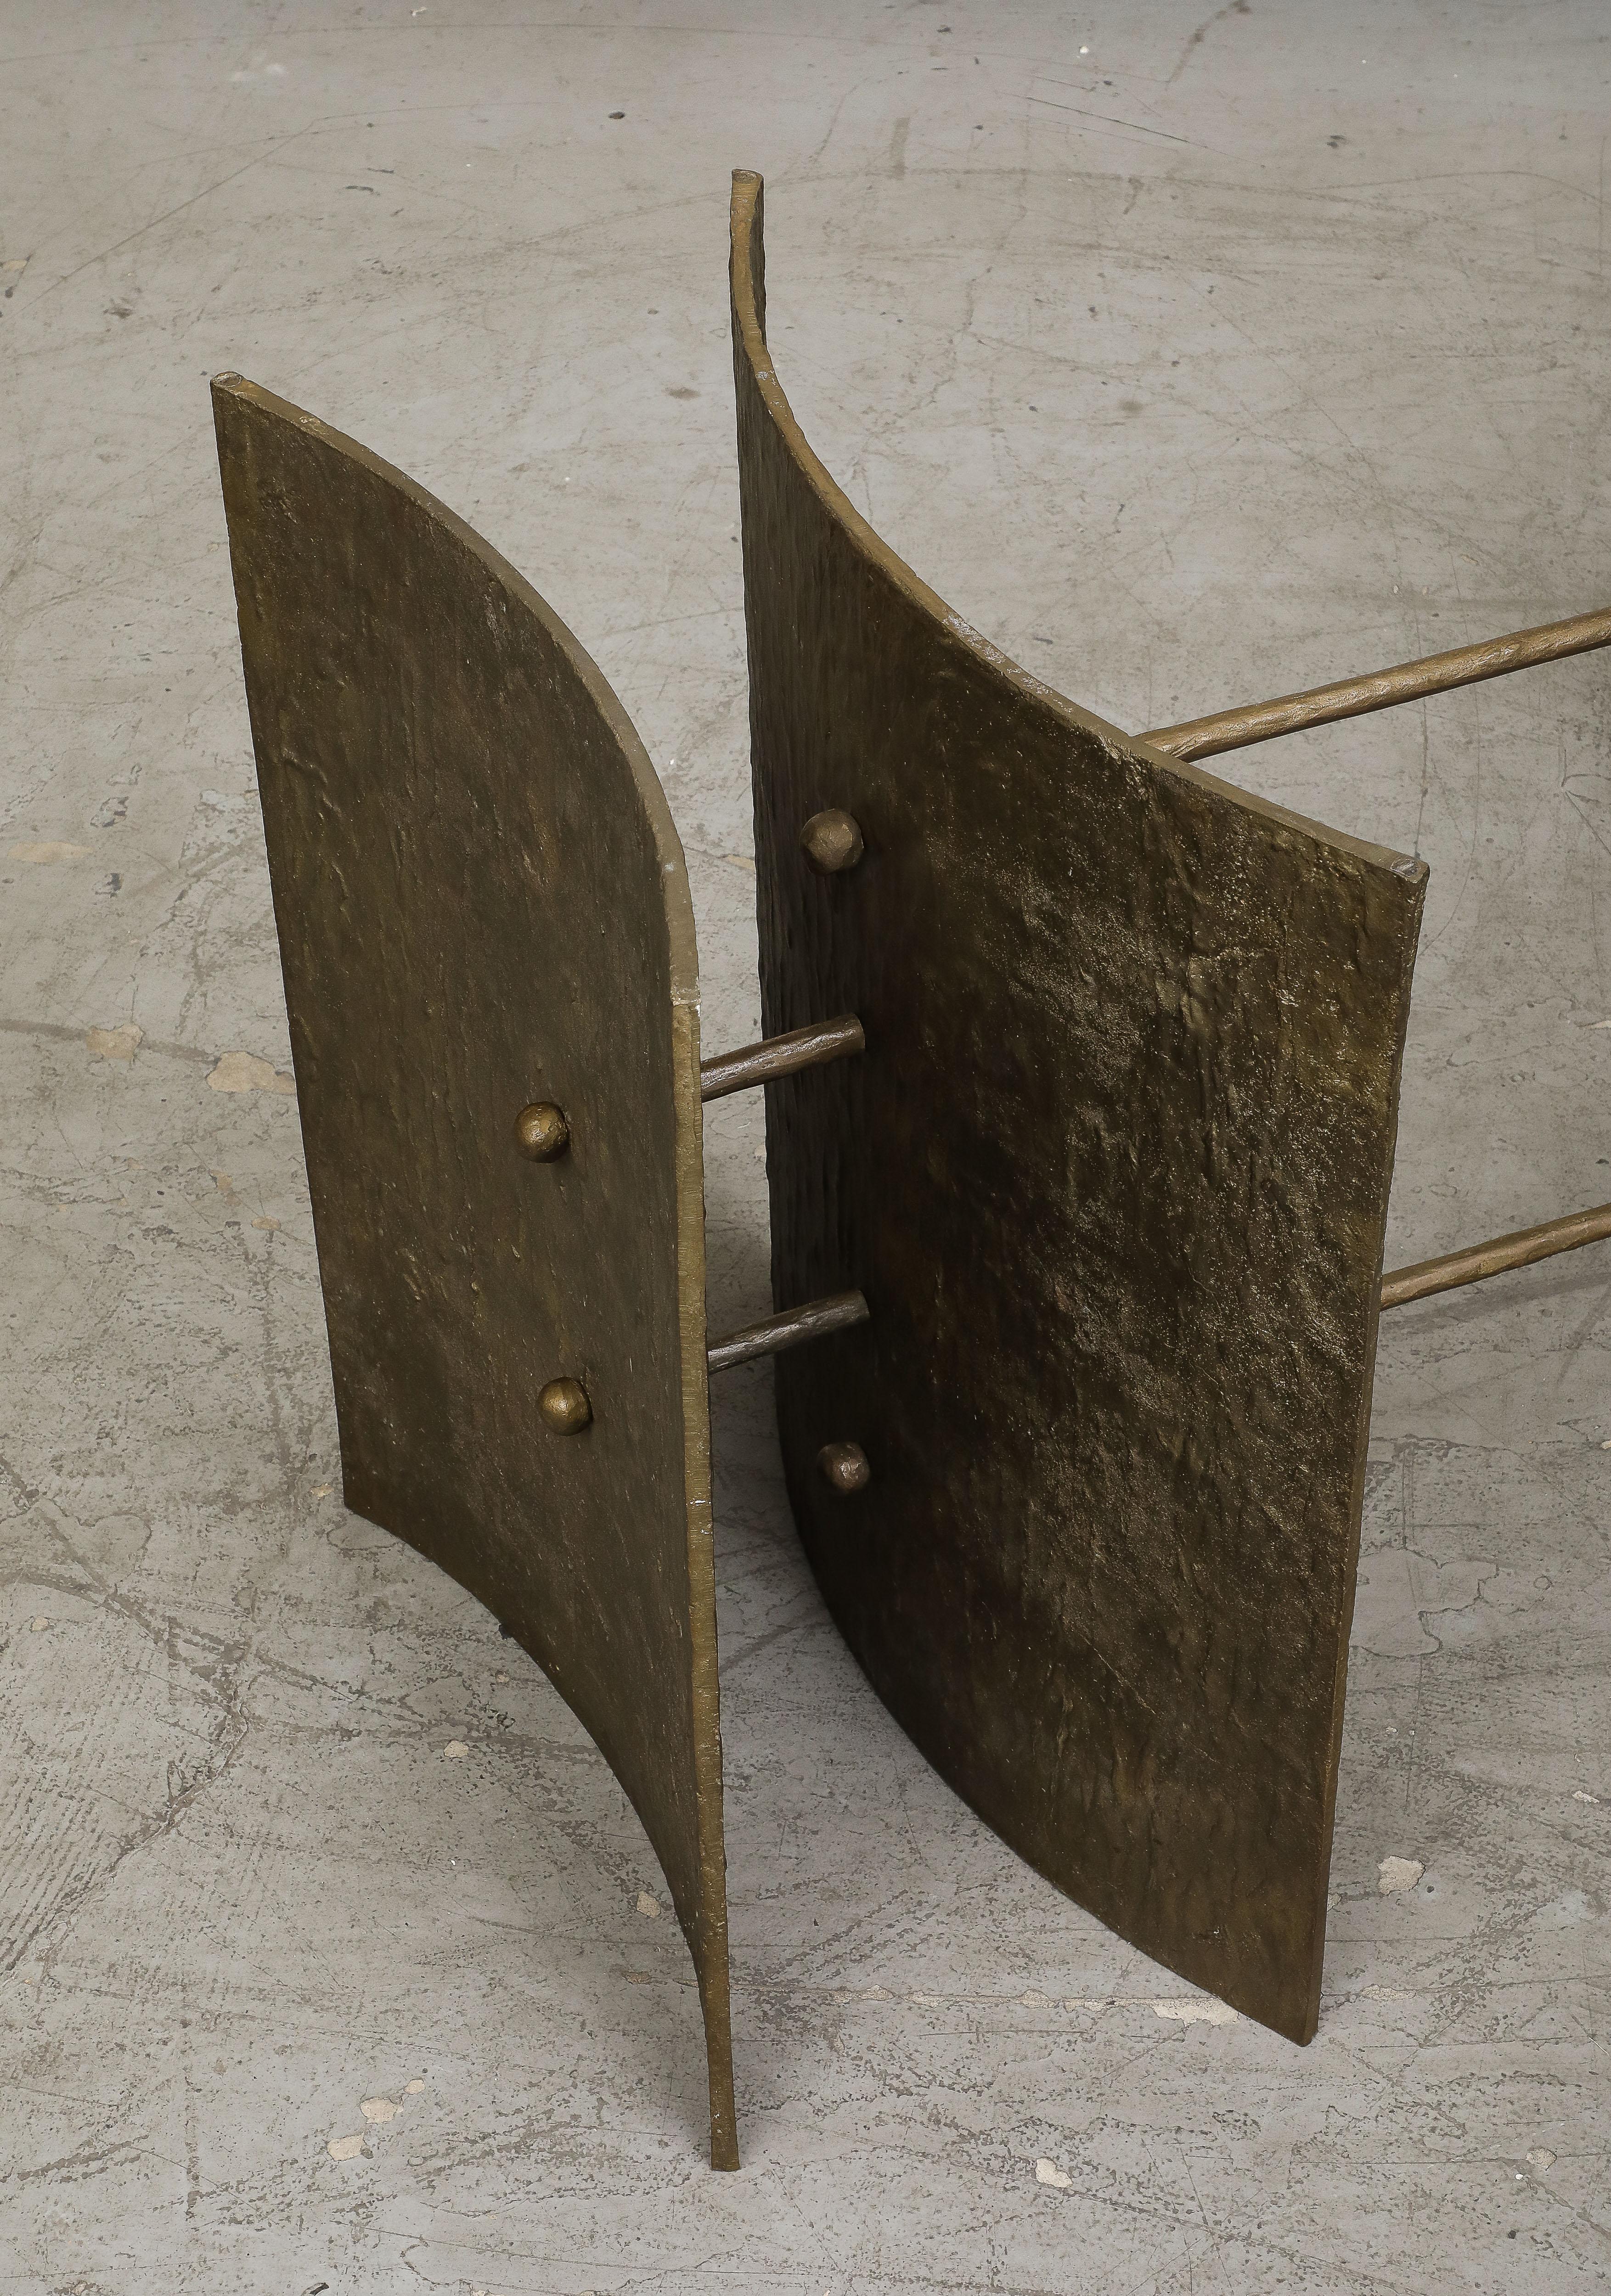 Exceptional Italian Full Bronze Sculptural Table Base, circa 1970s For Sale 4